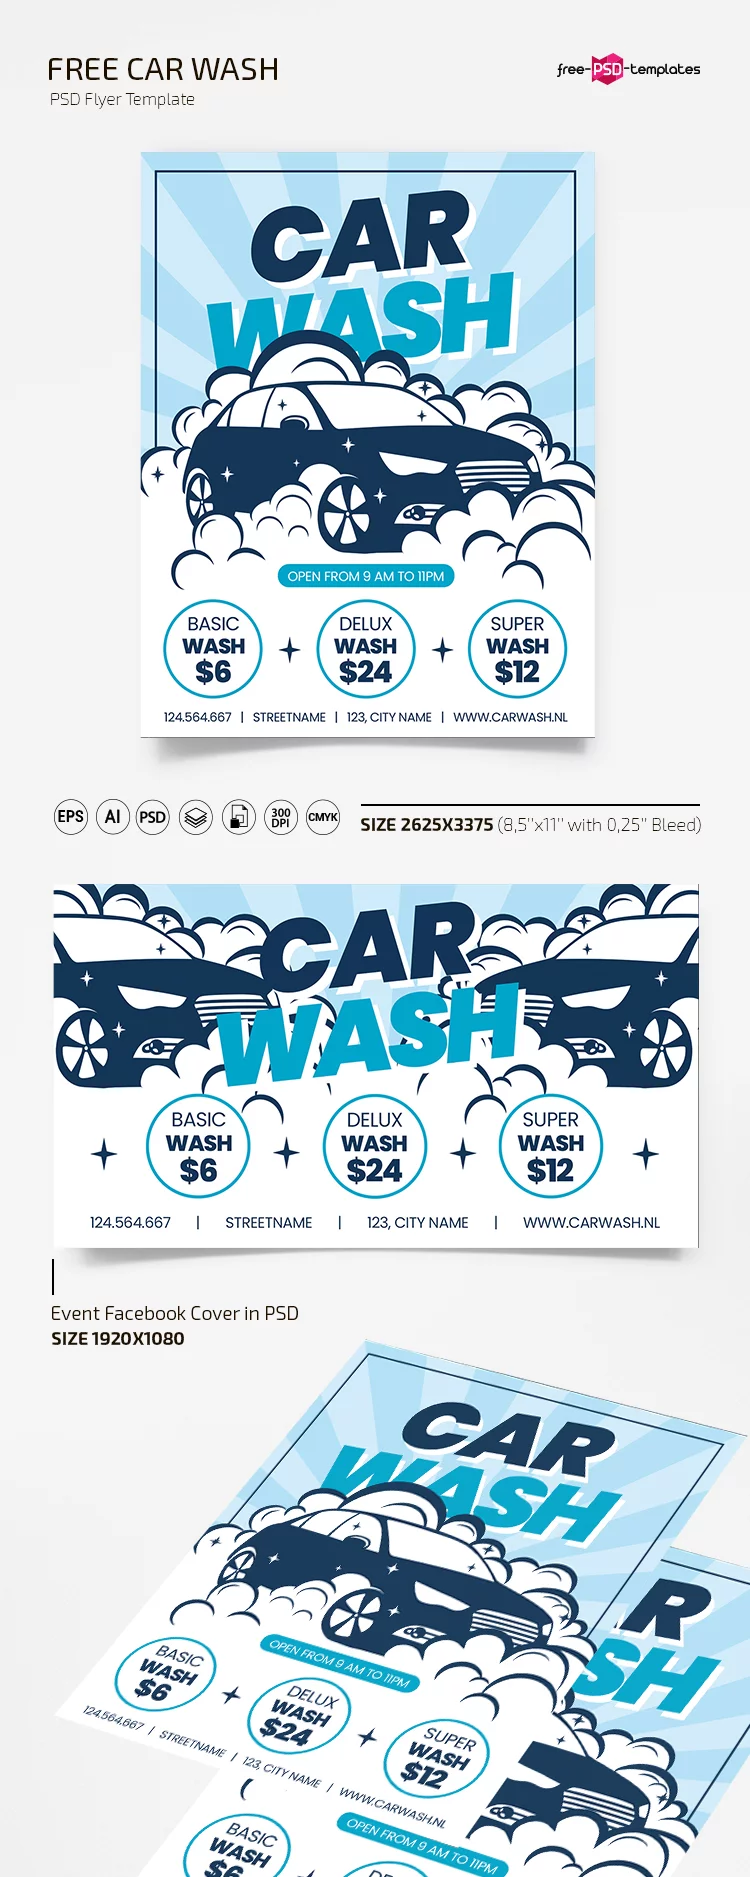 Free Car Wash Flyer Template in PSD + AI